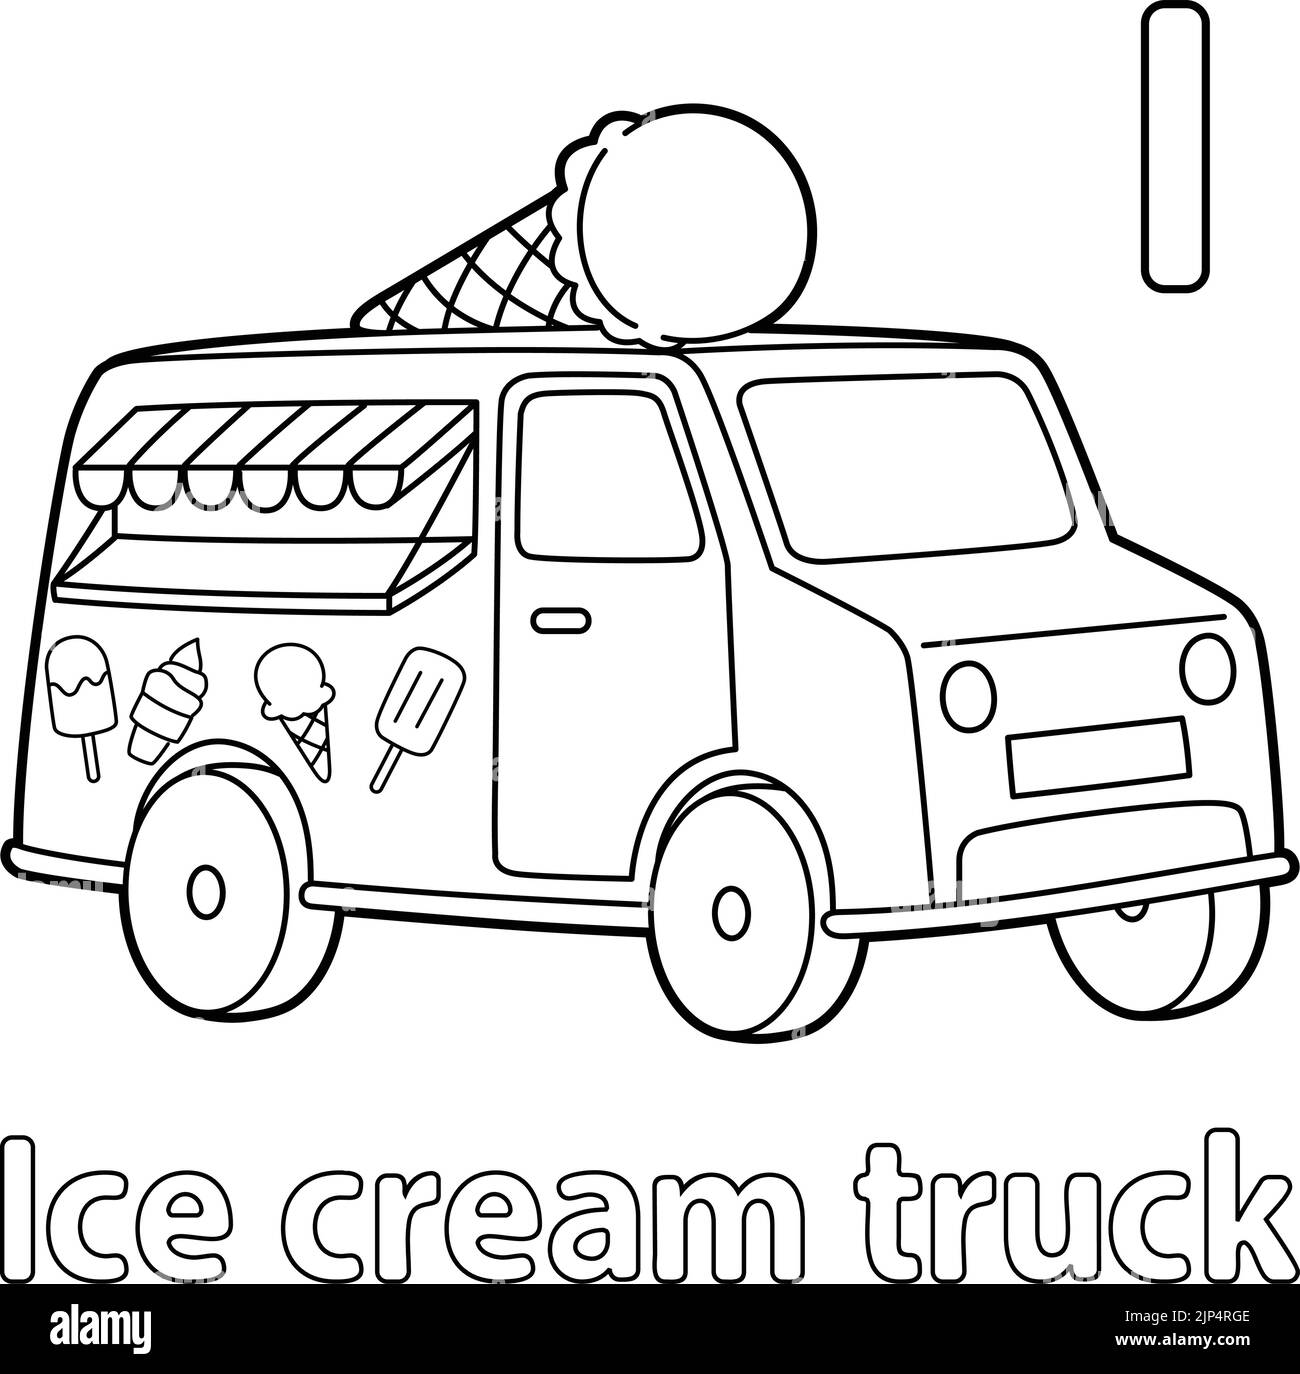 Ice Cream Truck Alphabet ABC Coloring Page I Stock Vector